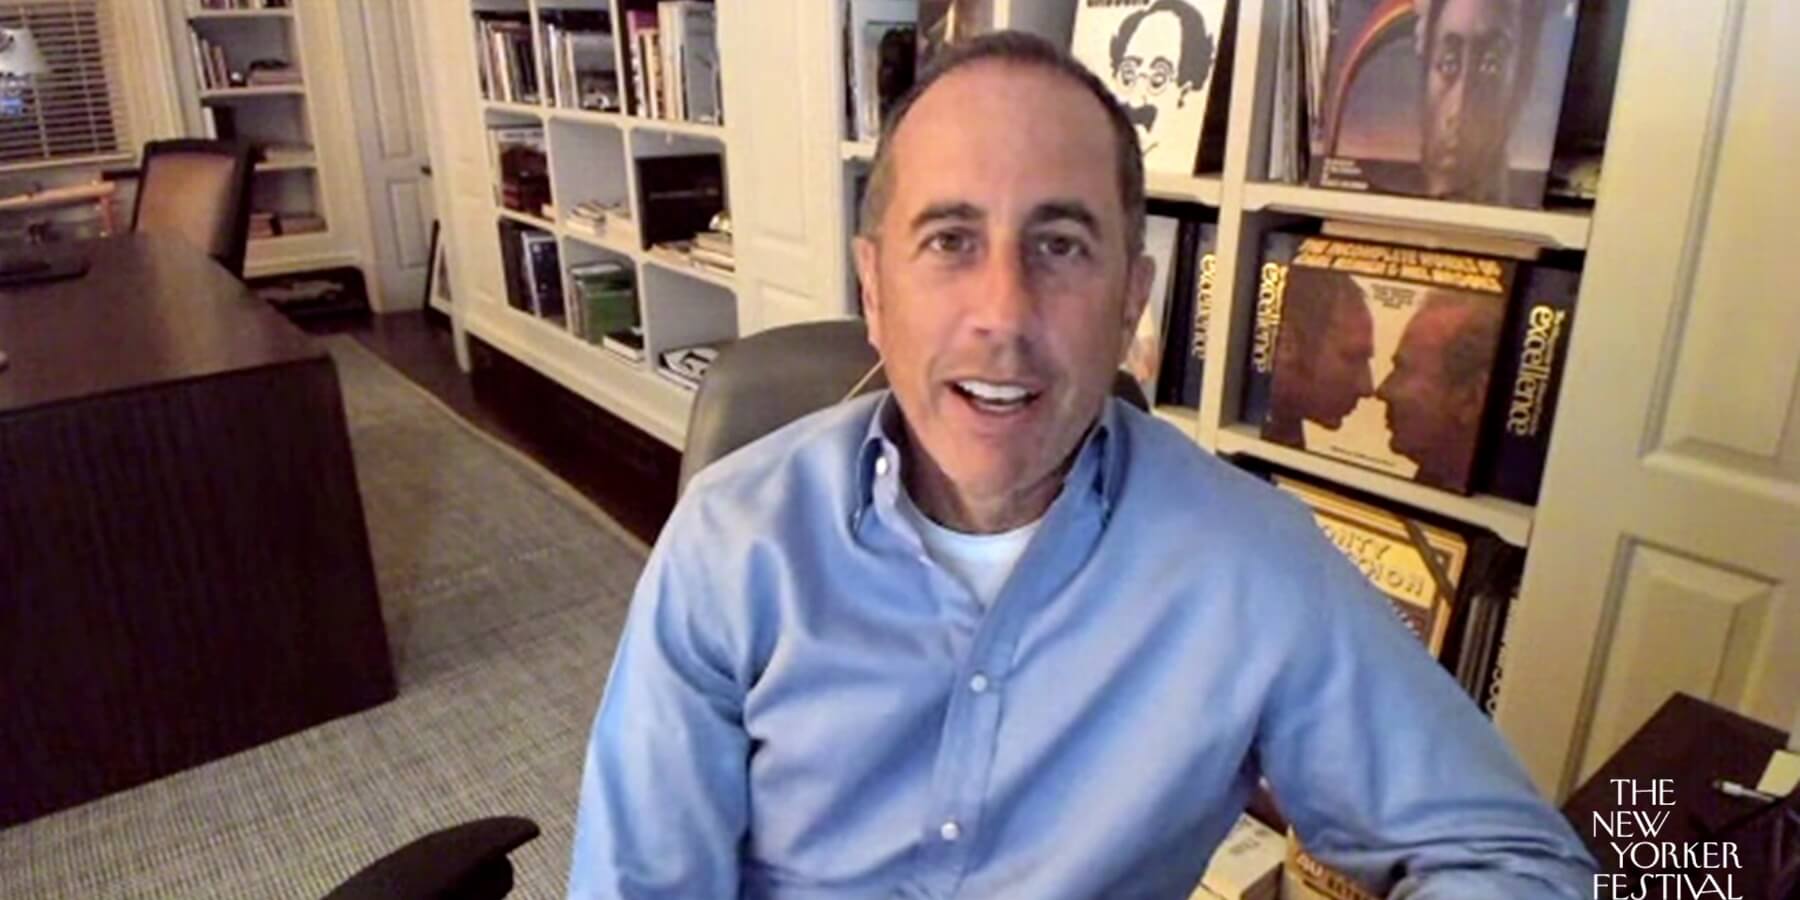 Jerry Seinfeld photographed at home in 2020.